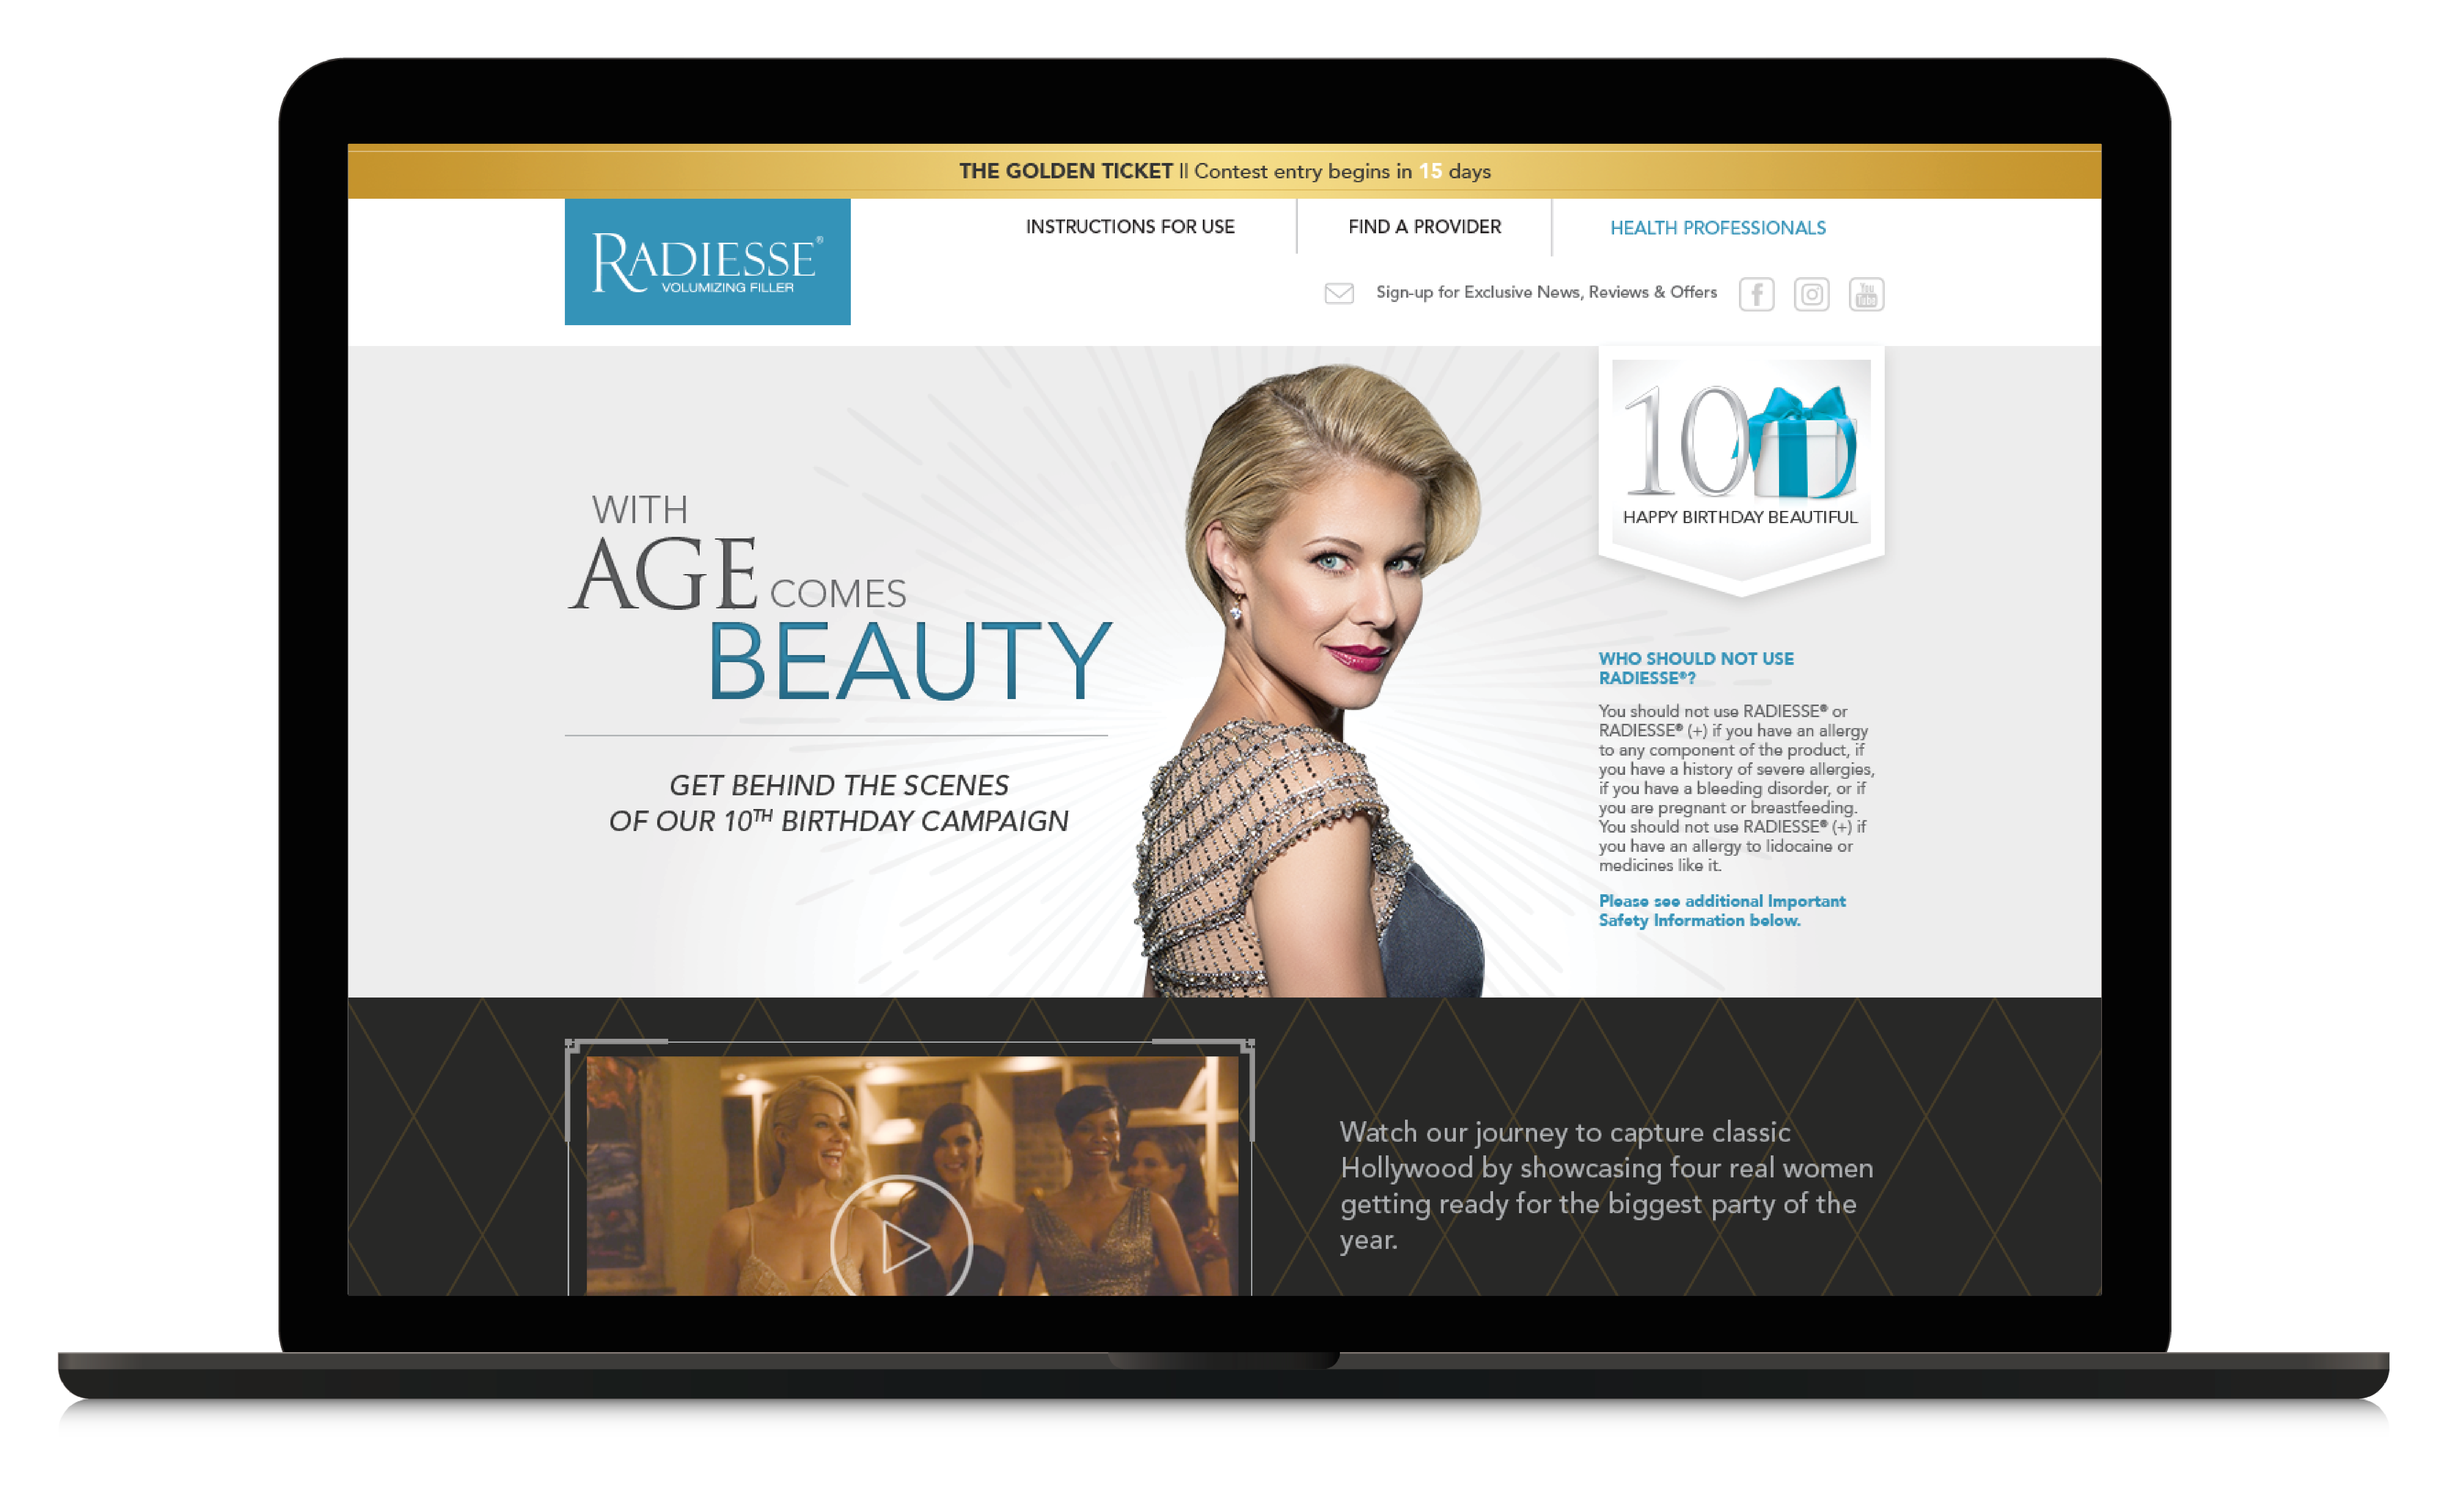 With Age Comes Beauty website mock-up